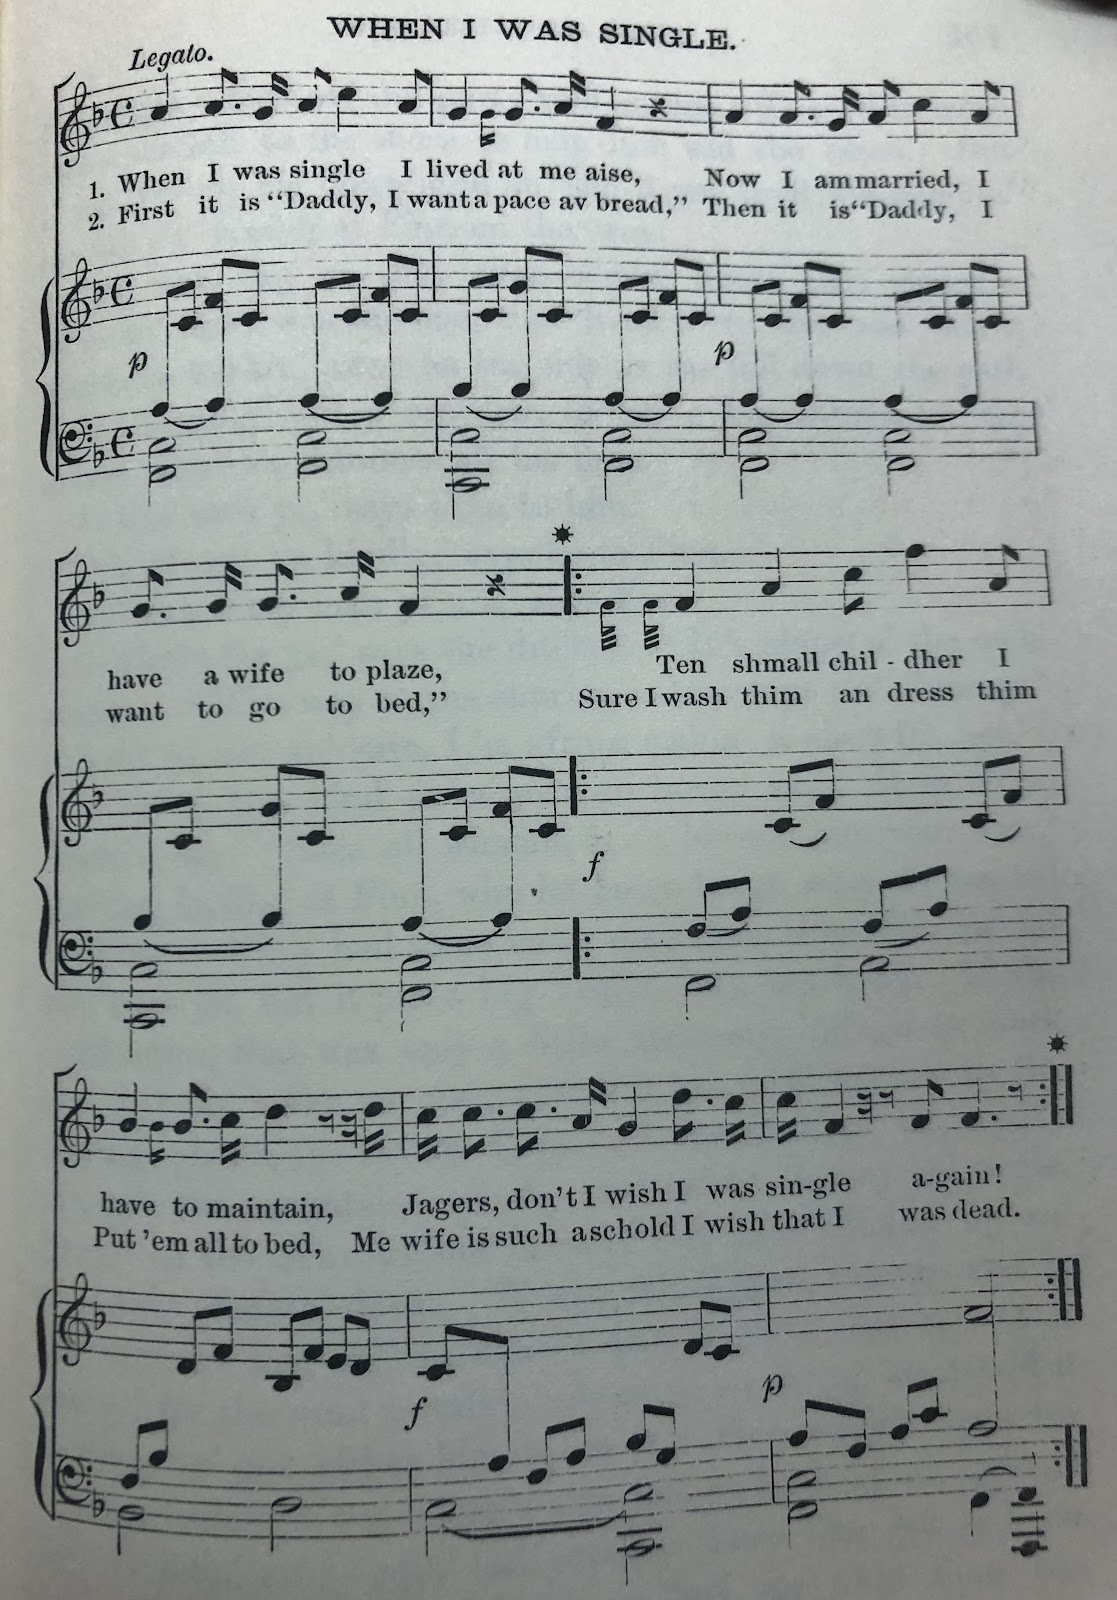 The sheet Music for a song entitled "When I was Single" that bemoans the married life. 